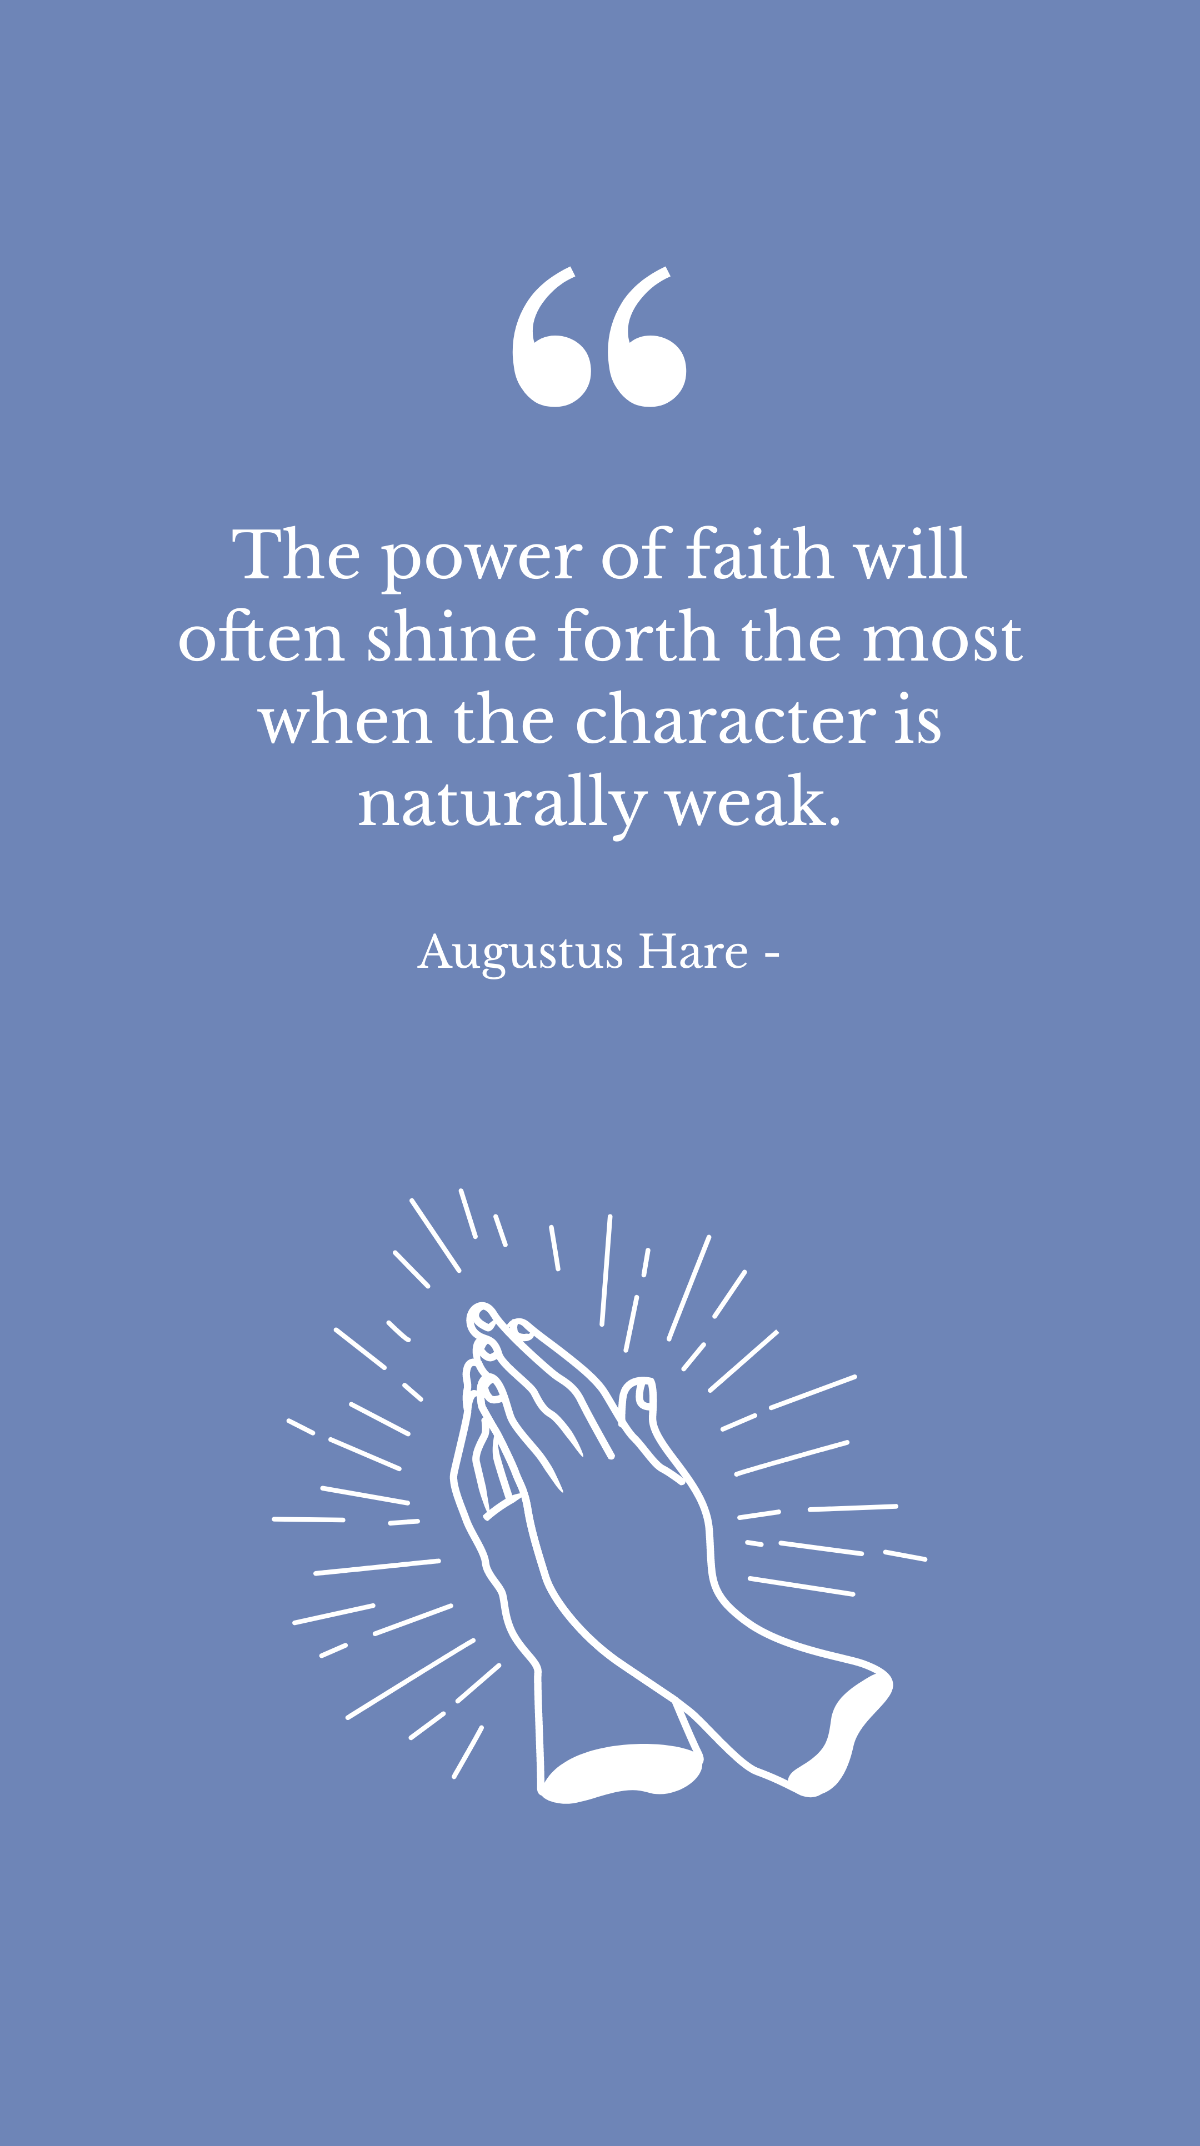 Free Augustus Hare - The power of faith will often shine forth the most when the character is naturally weak. Template